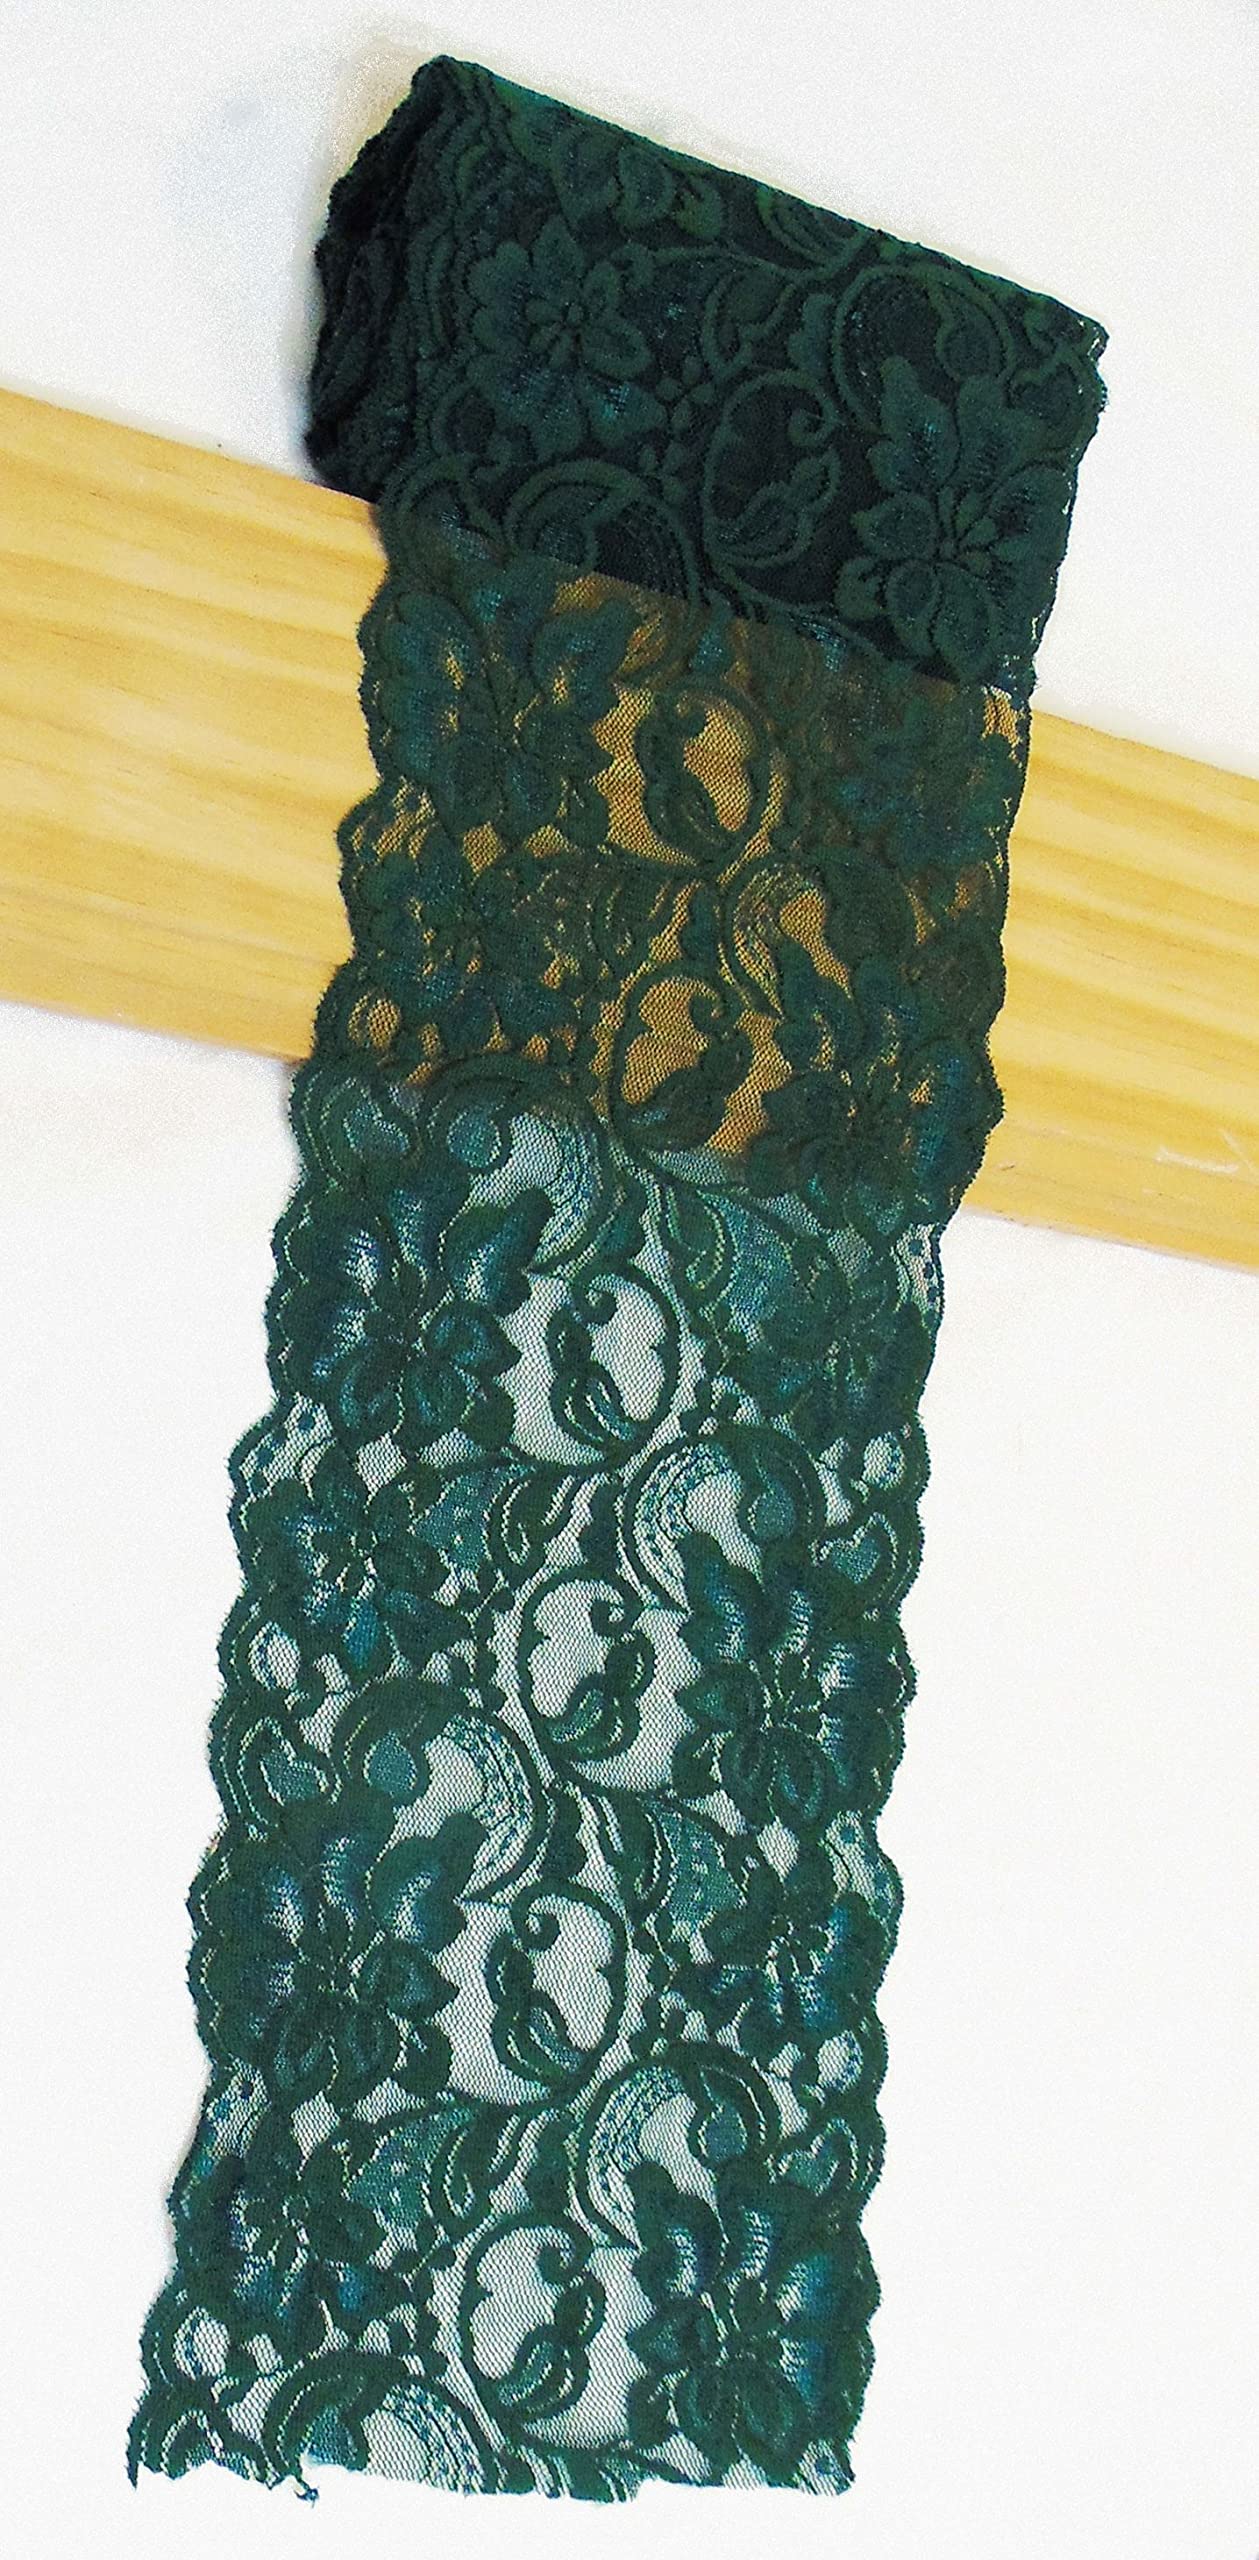 Dark Green 6 inch X 15 feet Floral lace Ribbon for Dress Making DIY Project Stretchy Smooth Soft and Great for Fashion (6" X 5 Yards Stretch-Green)